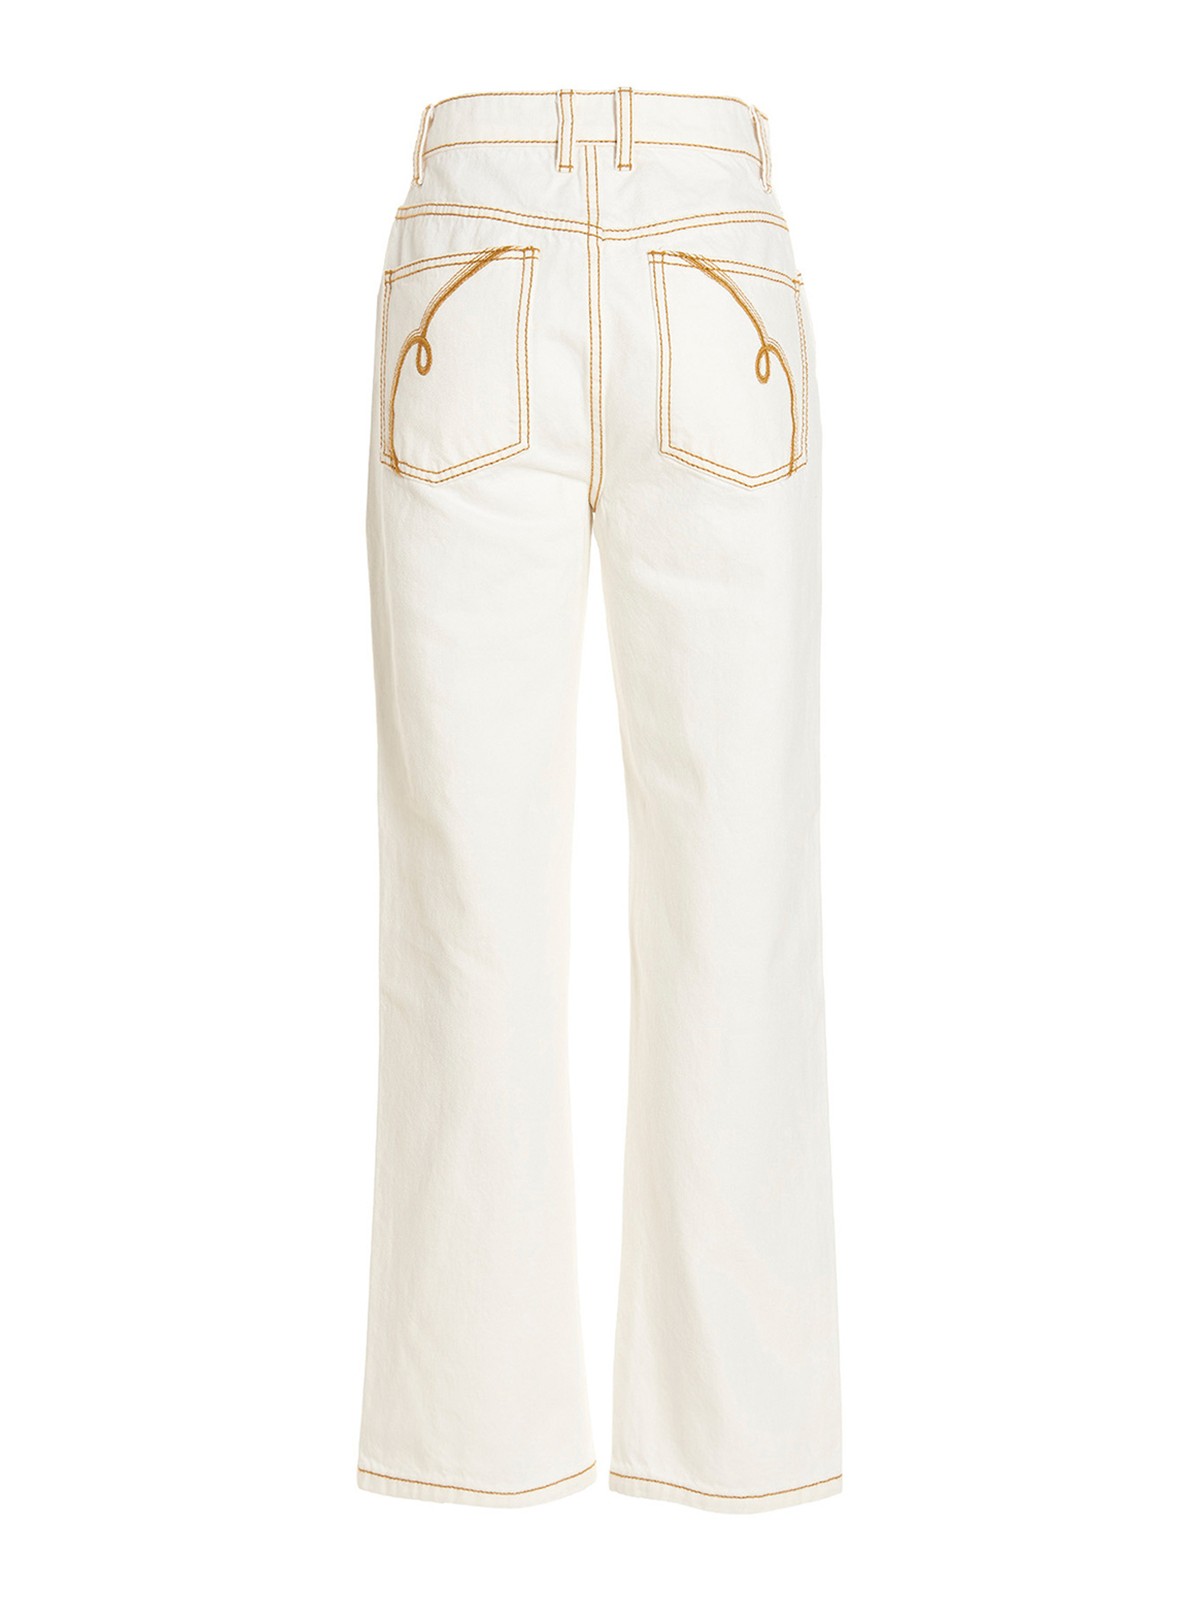 Bootcut jeans Tory Burch - Embroidered jeans - 138402106 